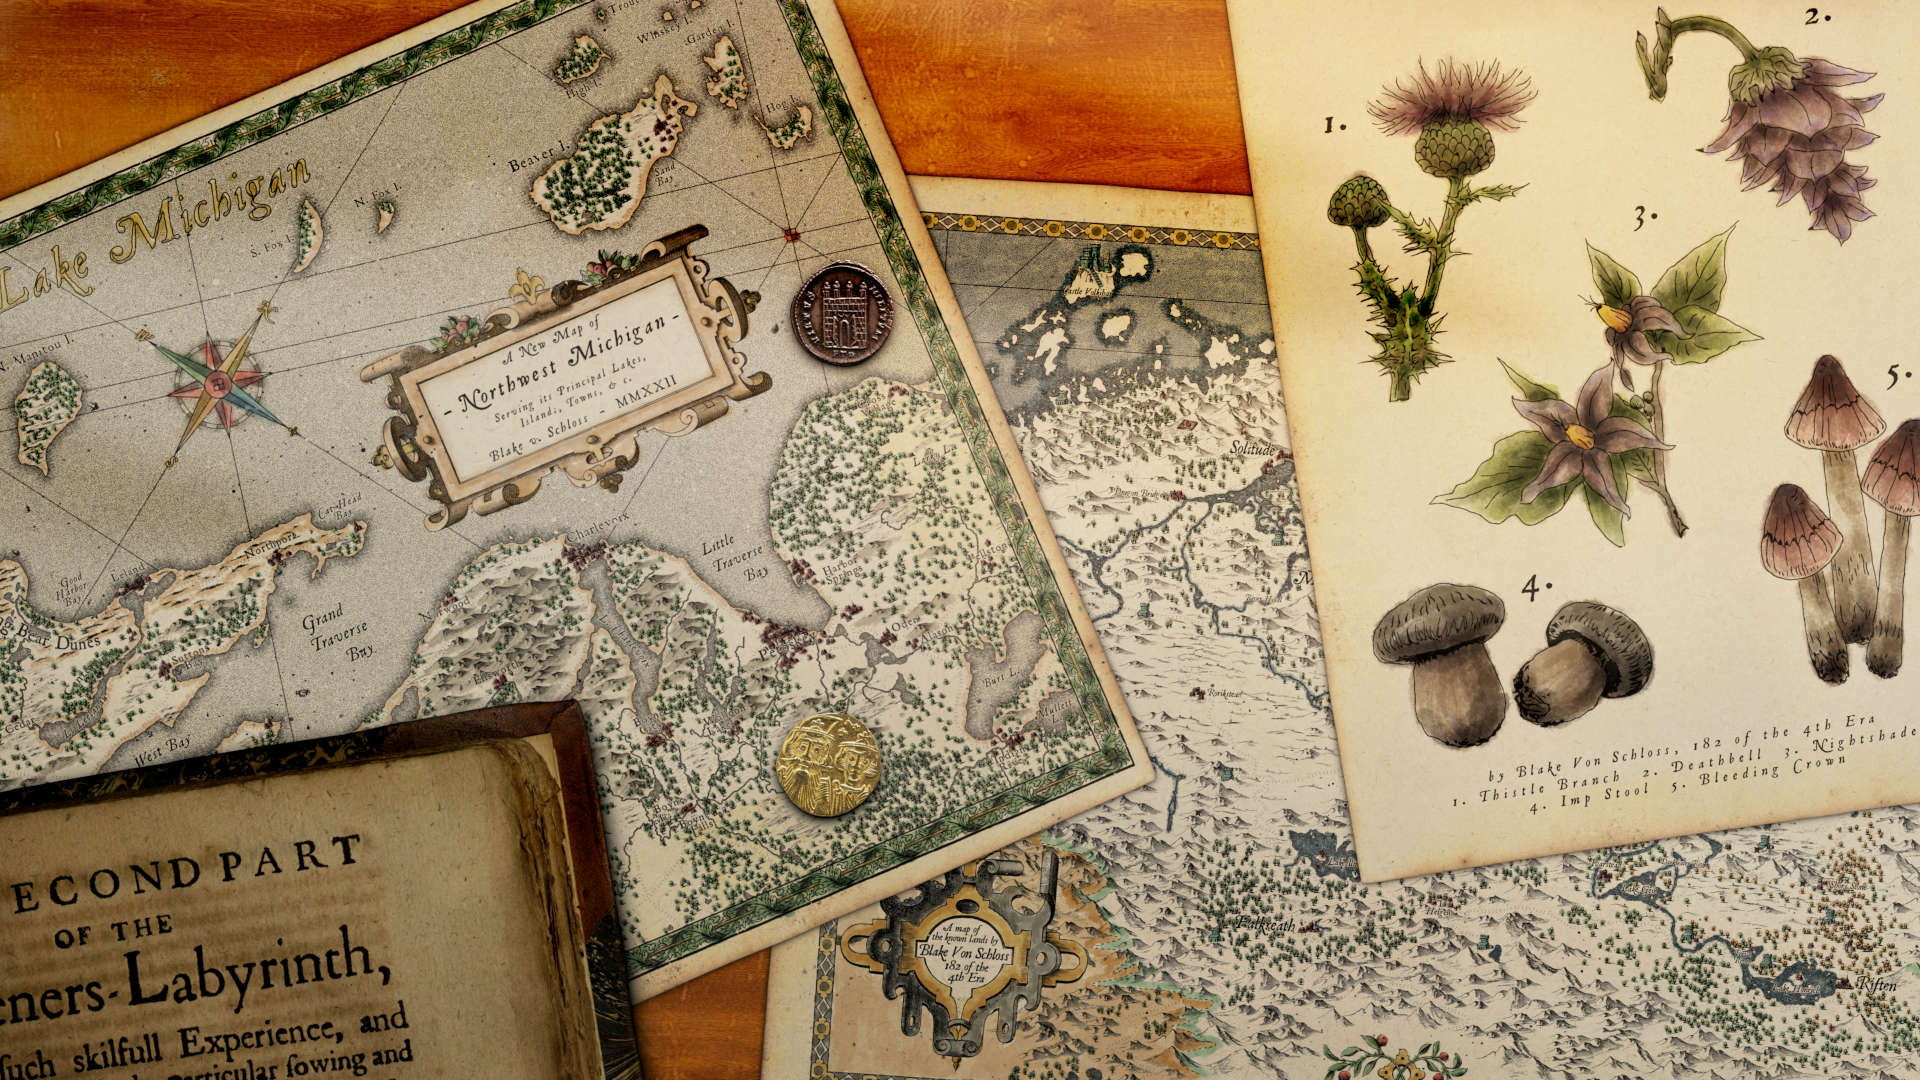 Custom maps and floral art by Blake Von Schloss in a historical 17th century European style.